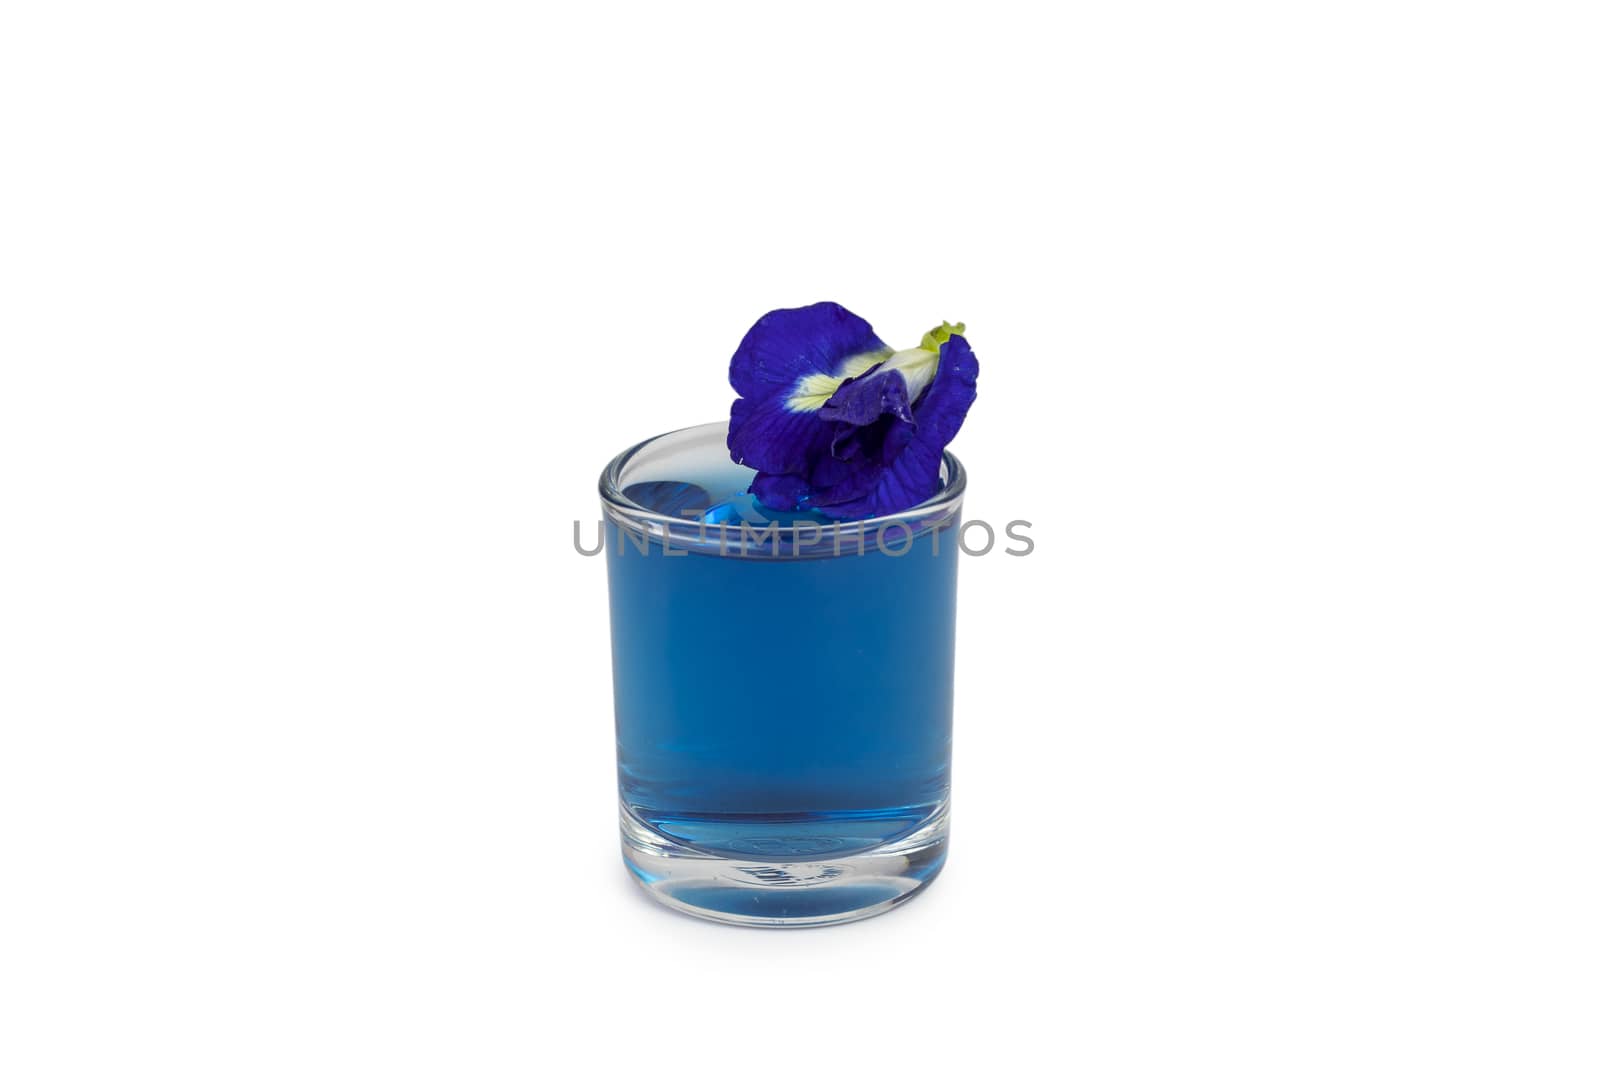 resh butterfly pea flowers juice isolated on white background by Khankeawsanan